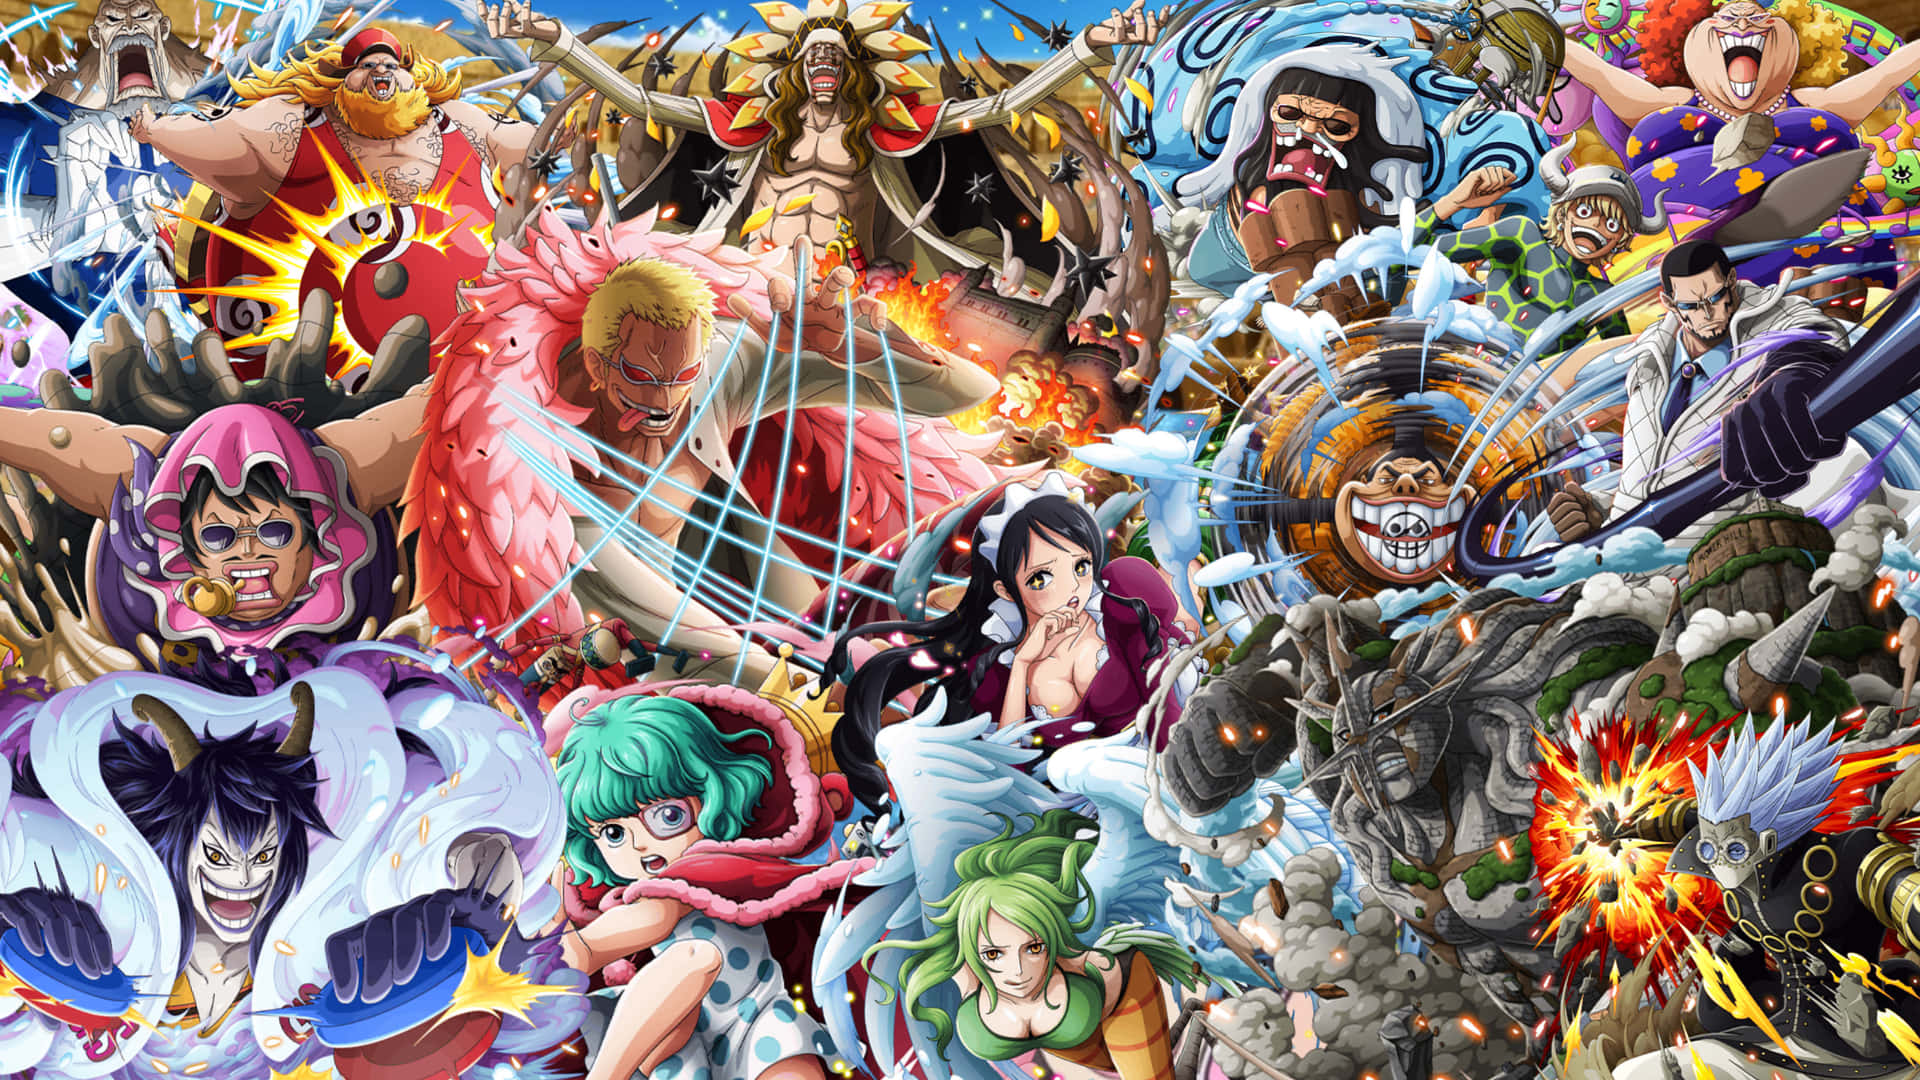 The Powerful Donquixote Family of One Piece Wallpaper